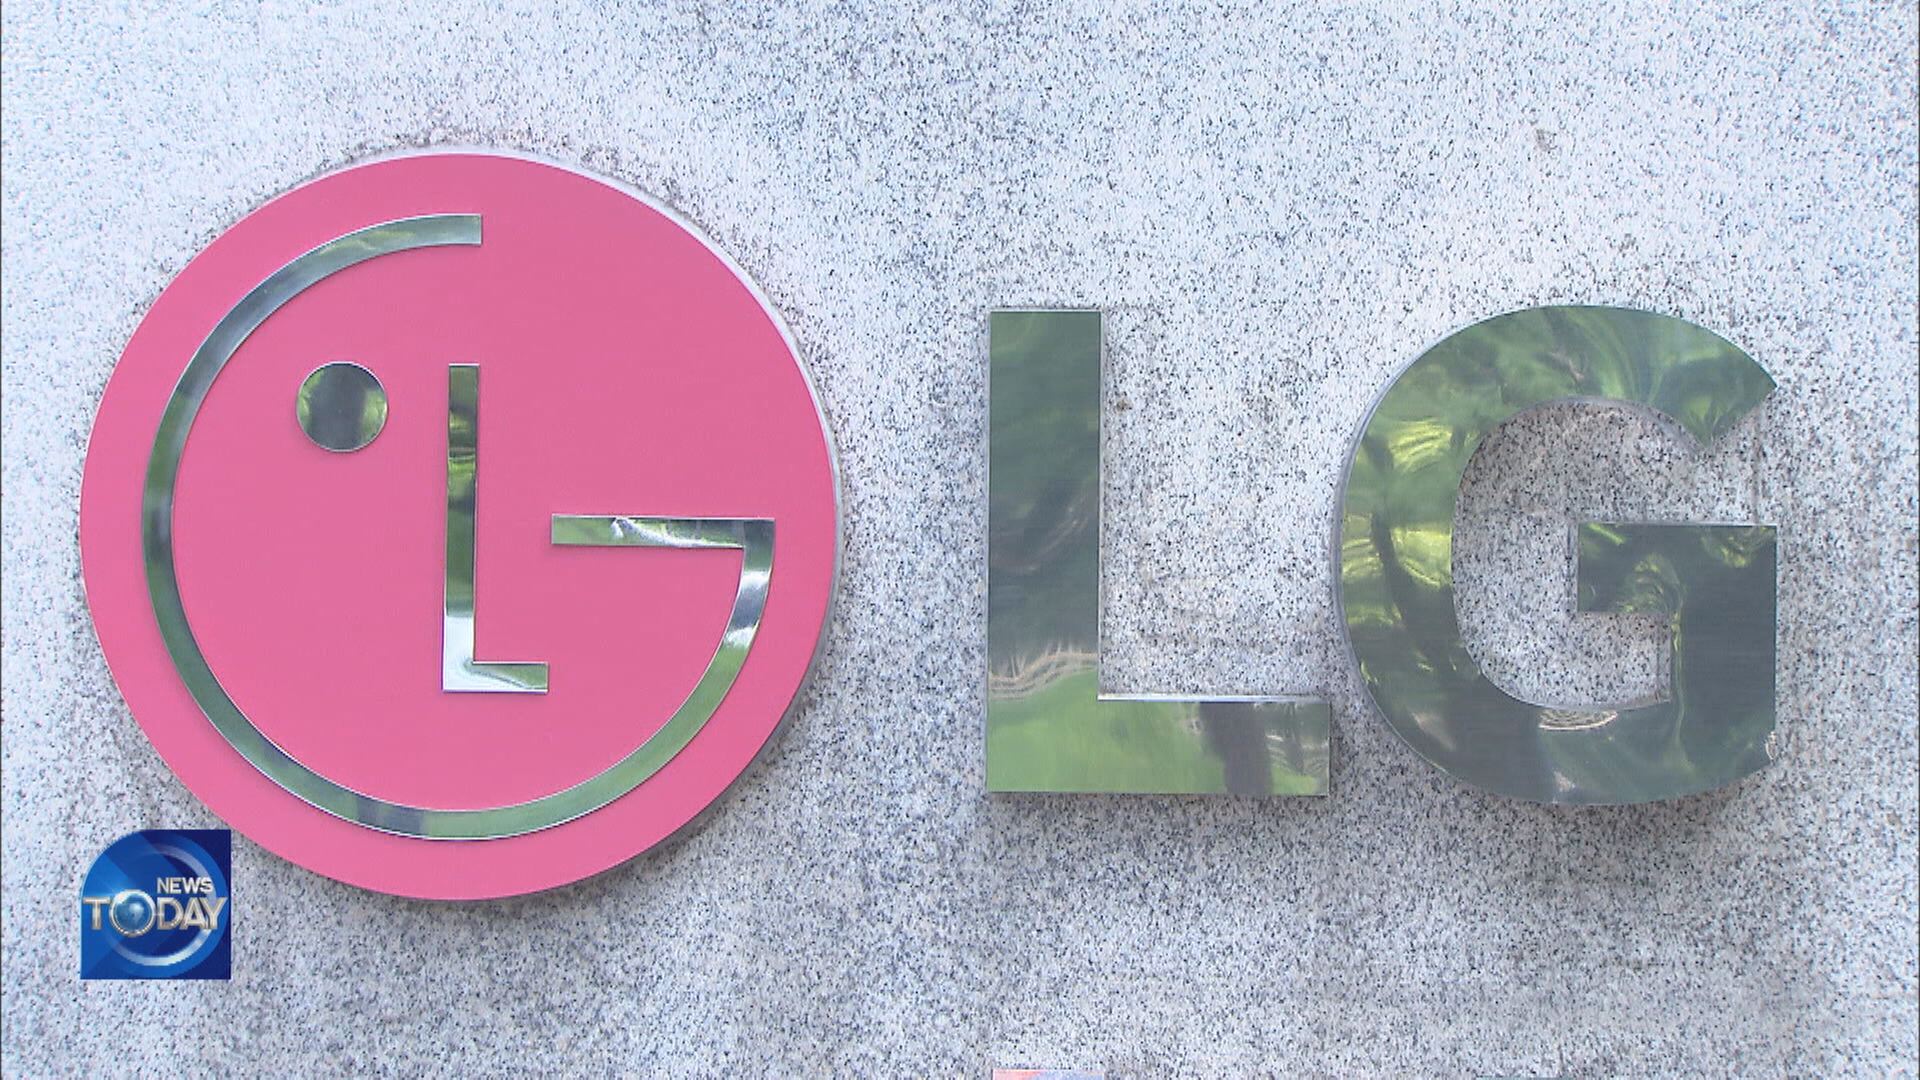 LG-GM TO BUILD BATTERY MANUFACTURING PLANT